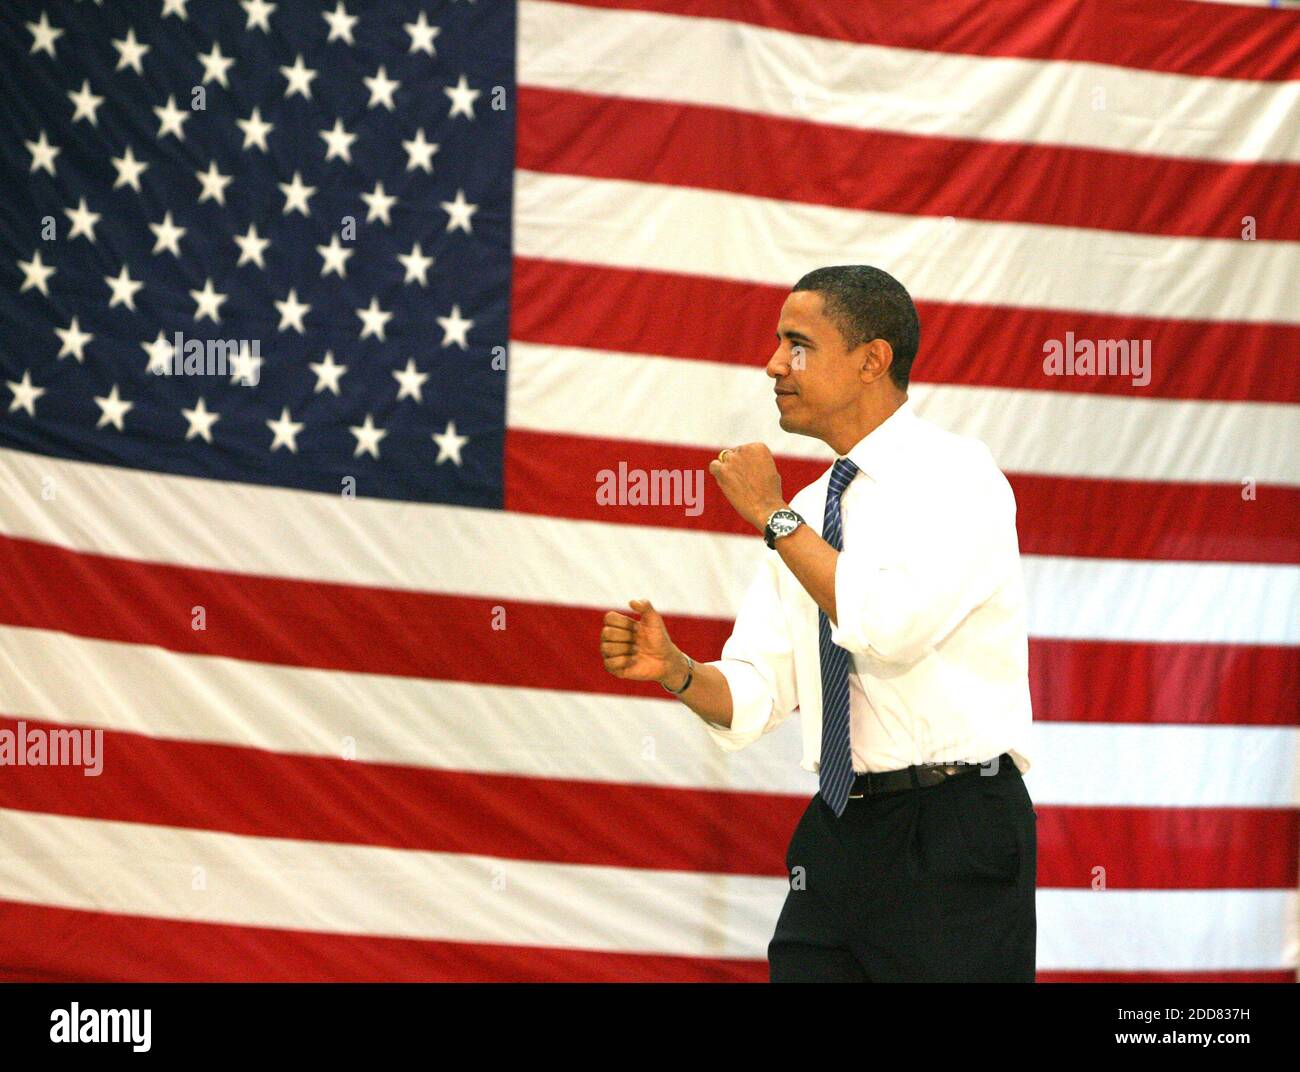 NO FILM, NO VIDEO, NO TV, NO DOCUMENTARY - Democratic presidential candidate Sen. Barack Obama arrives at a meeting of volunteers and supporters at Freedom High School in Orlando, FL, USA on August 1, 2008. Photo by Joe Burbank/Orlando Sentinel/MCT/ABACAPRESS.COM Stock Photo